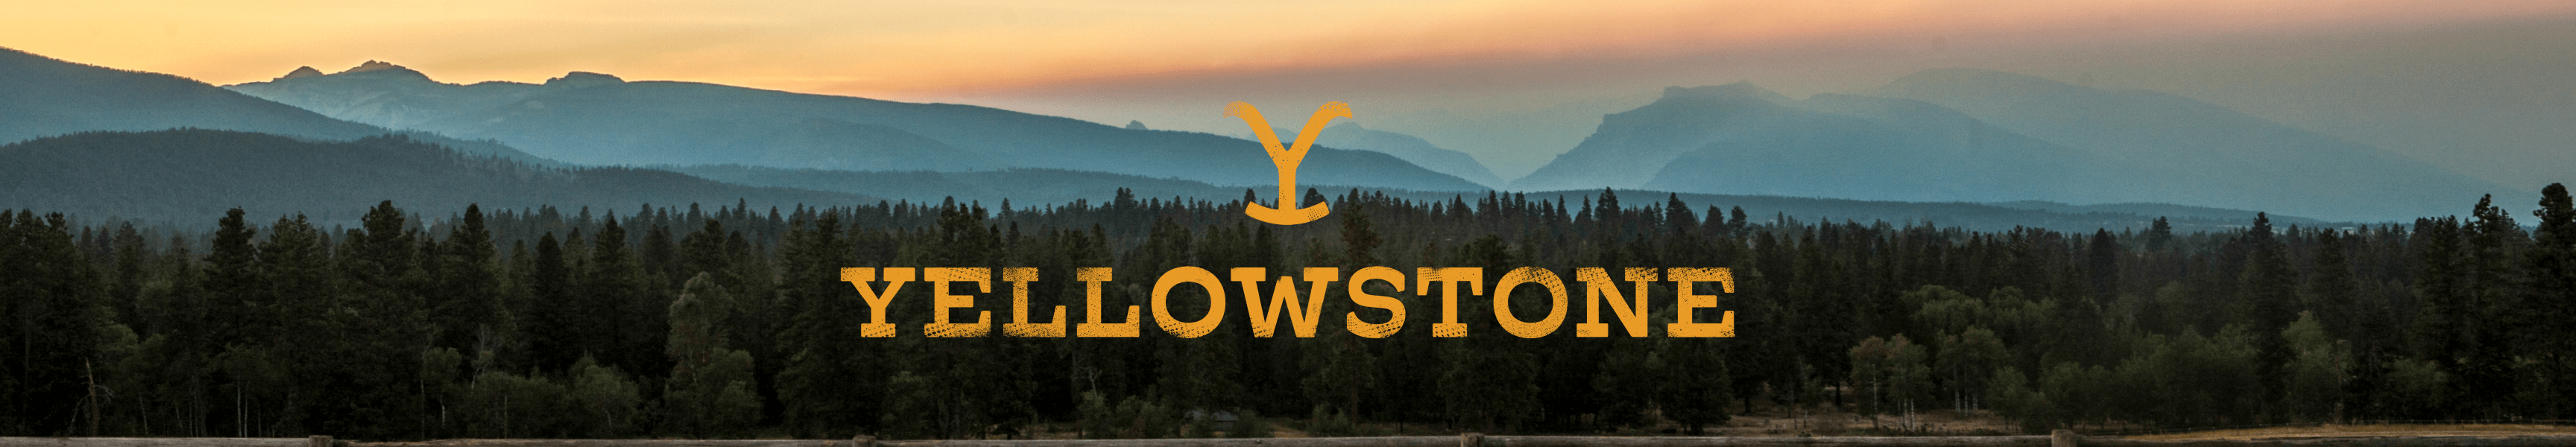 Top 10 Gifts for Yellowstone Fans